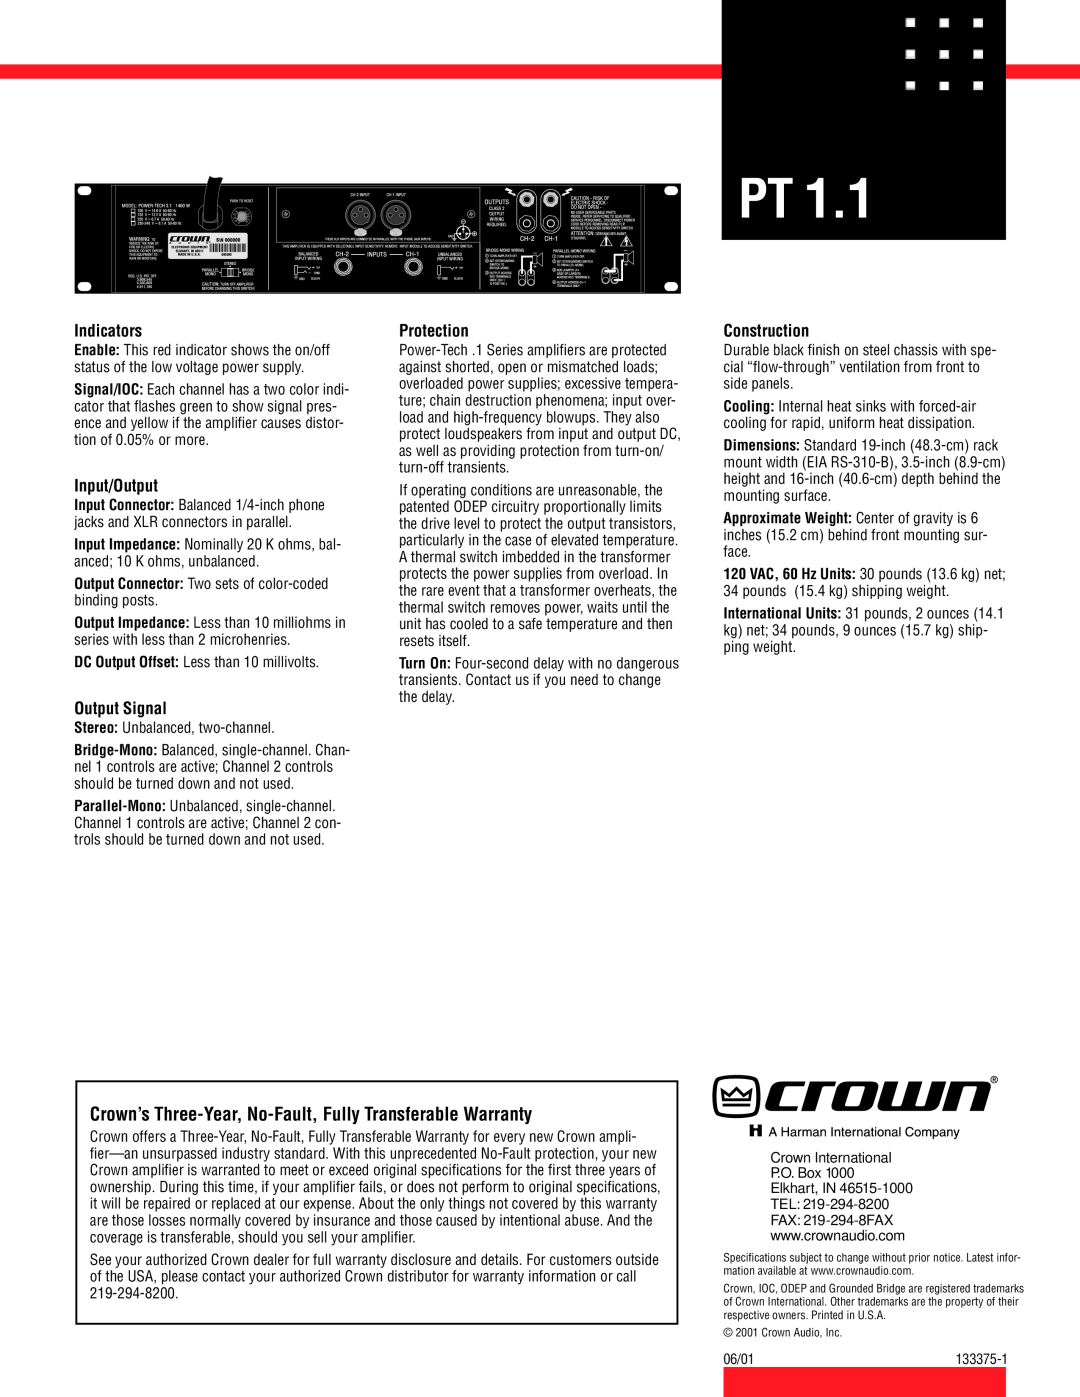 Crown Audio PT 1.1 specifications Indicators, Input/Output, Output Signal, Protection, Construction 